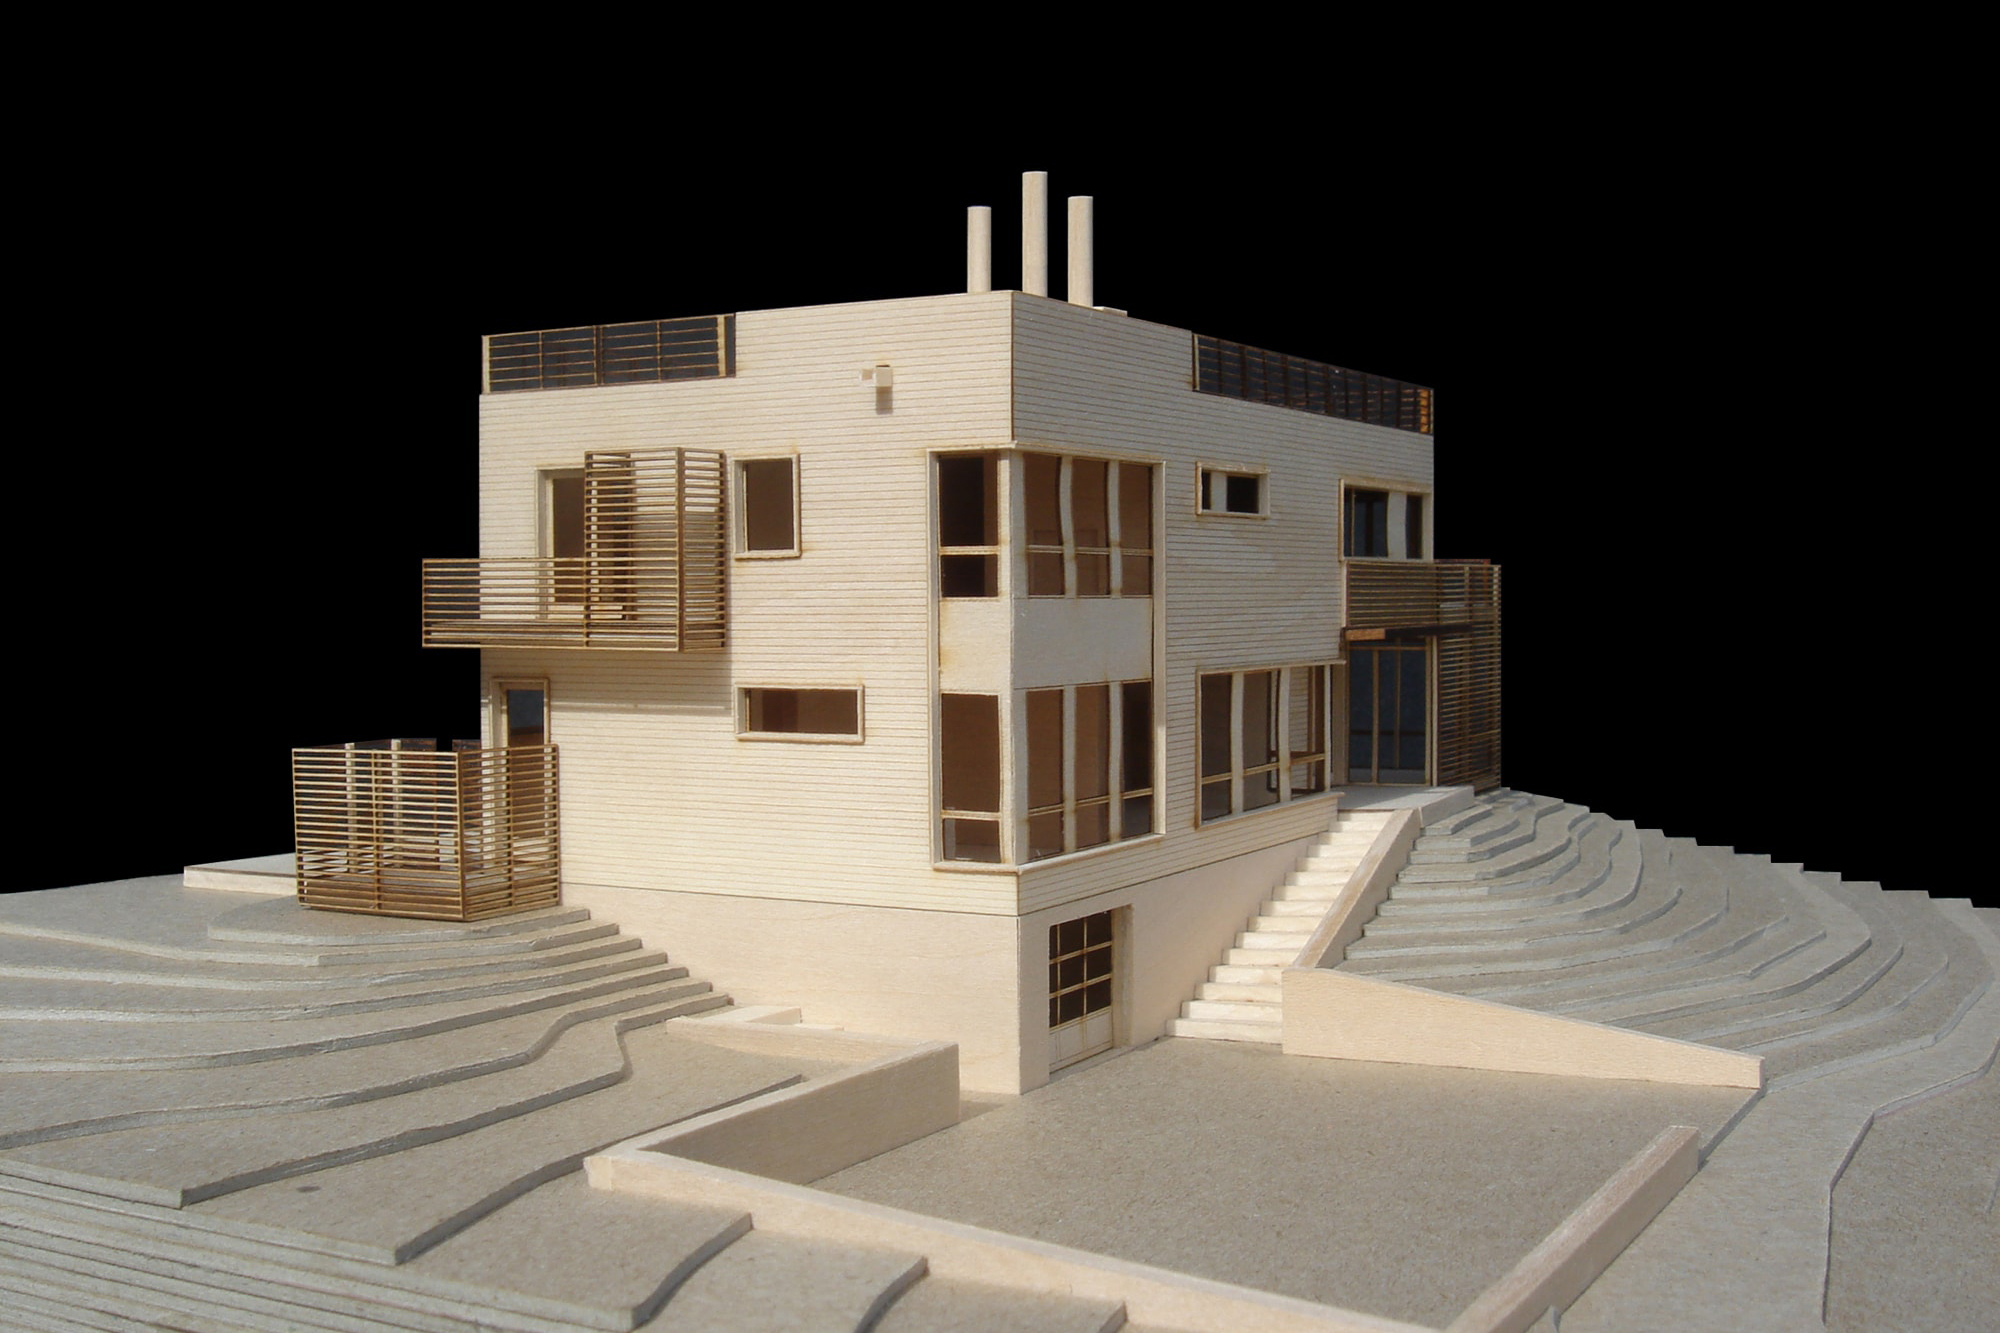 res4-resolution-4-architecture-cape house-model-04.jpg